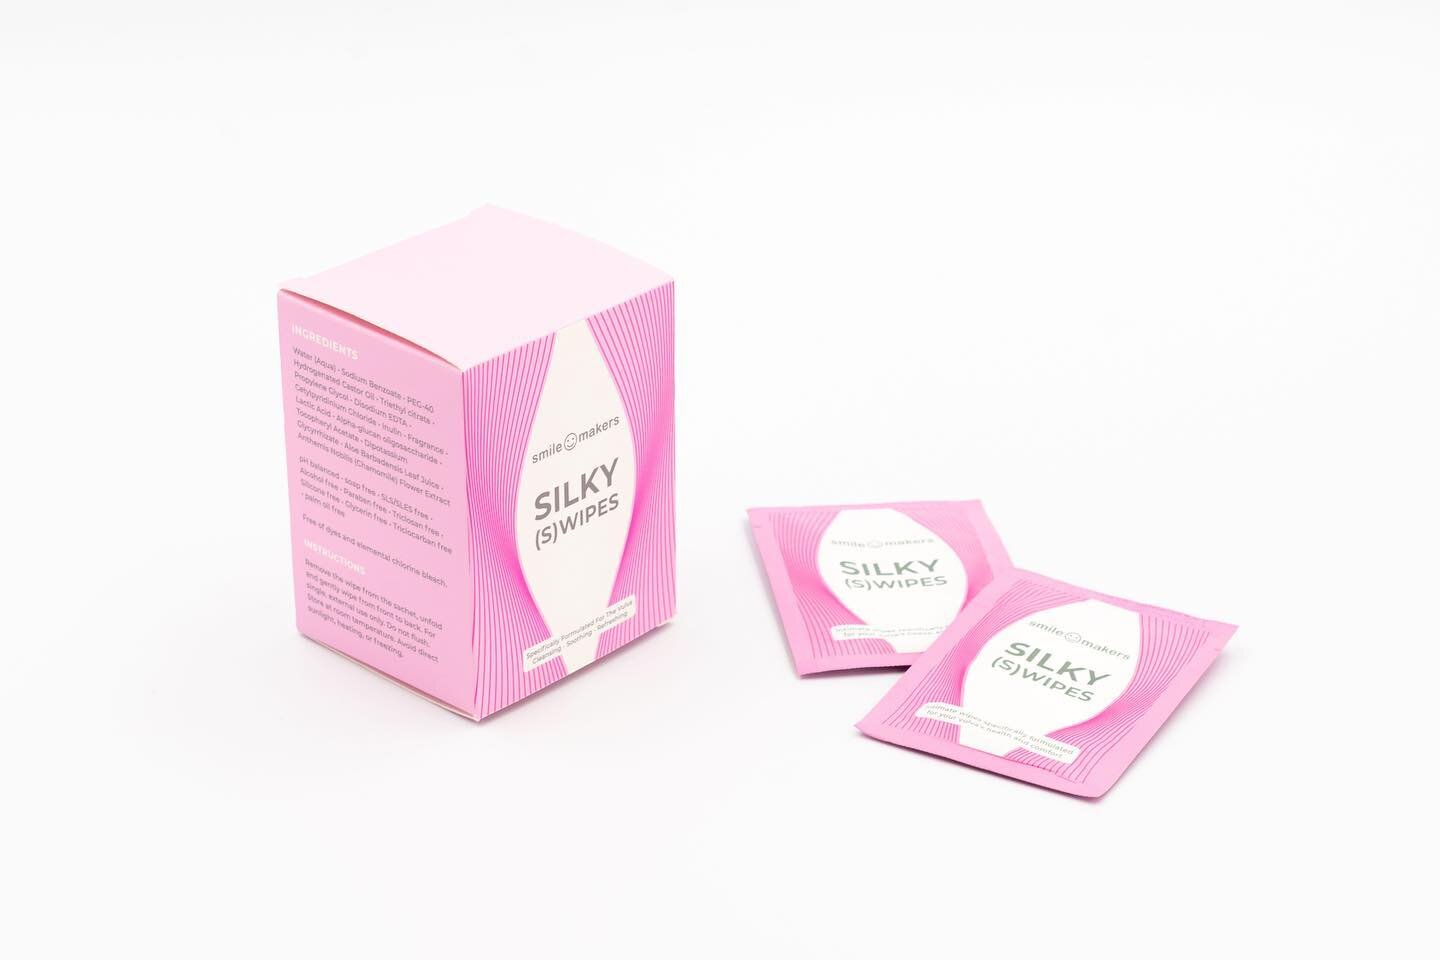 New product 🚨🚨🚨

Smile makers newbie to the shelves - Silky (s)wipes

Individually wrapped biodegradable bamboo sheets

pH balancing and loaded with prebiotics

Gynecological approved

Hypoallergenic

Soothing and moisturising

Body-safe, vegan an